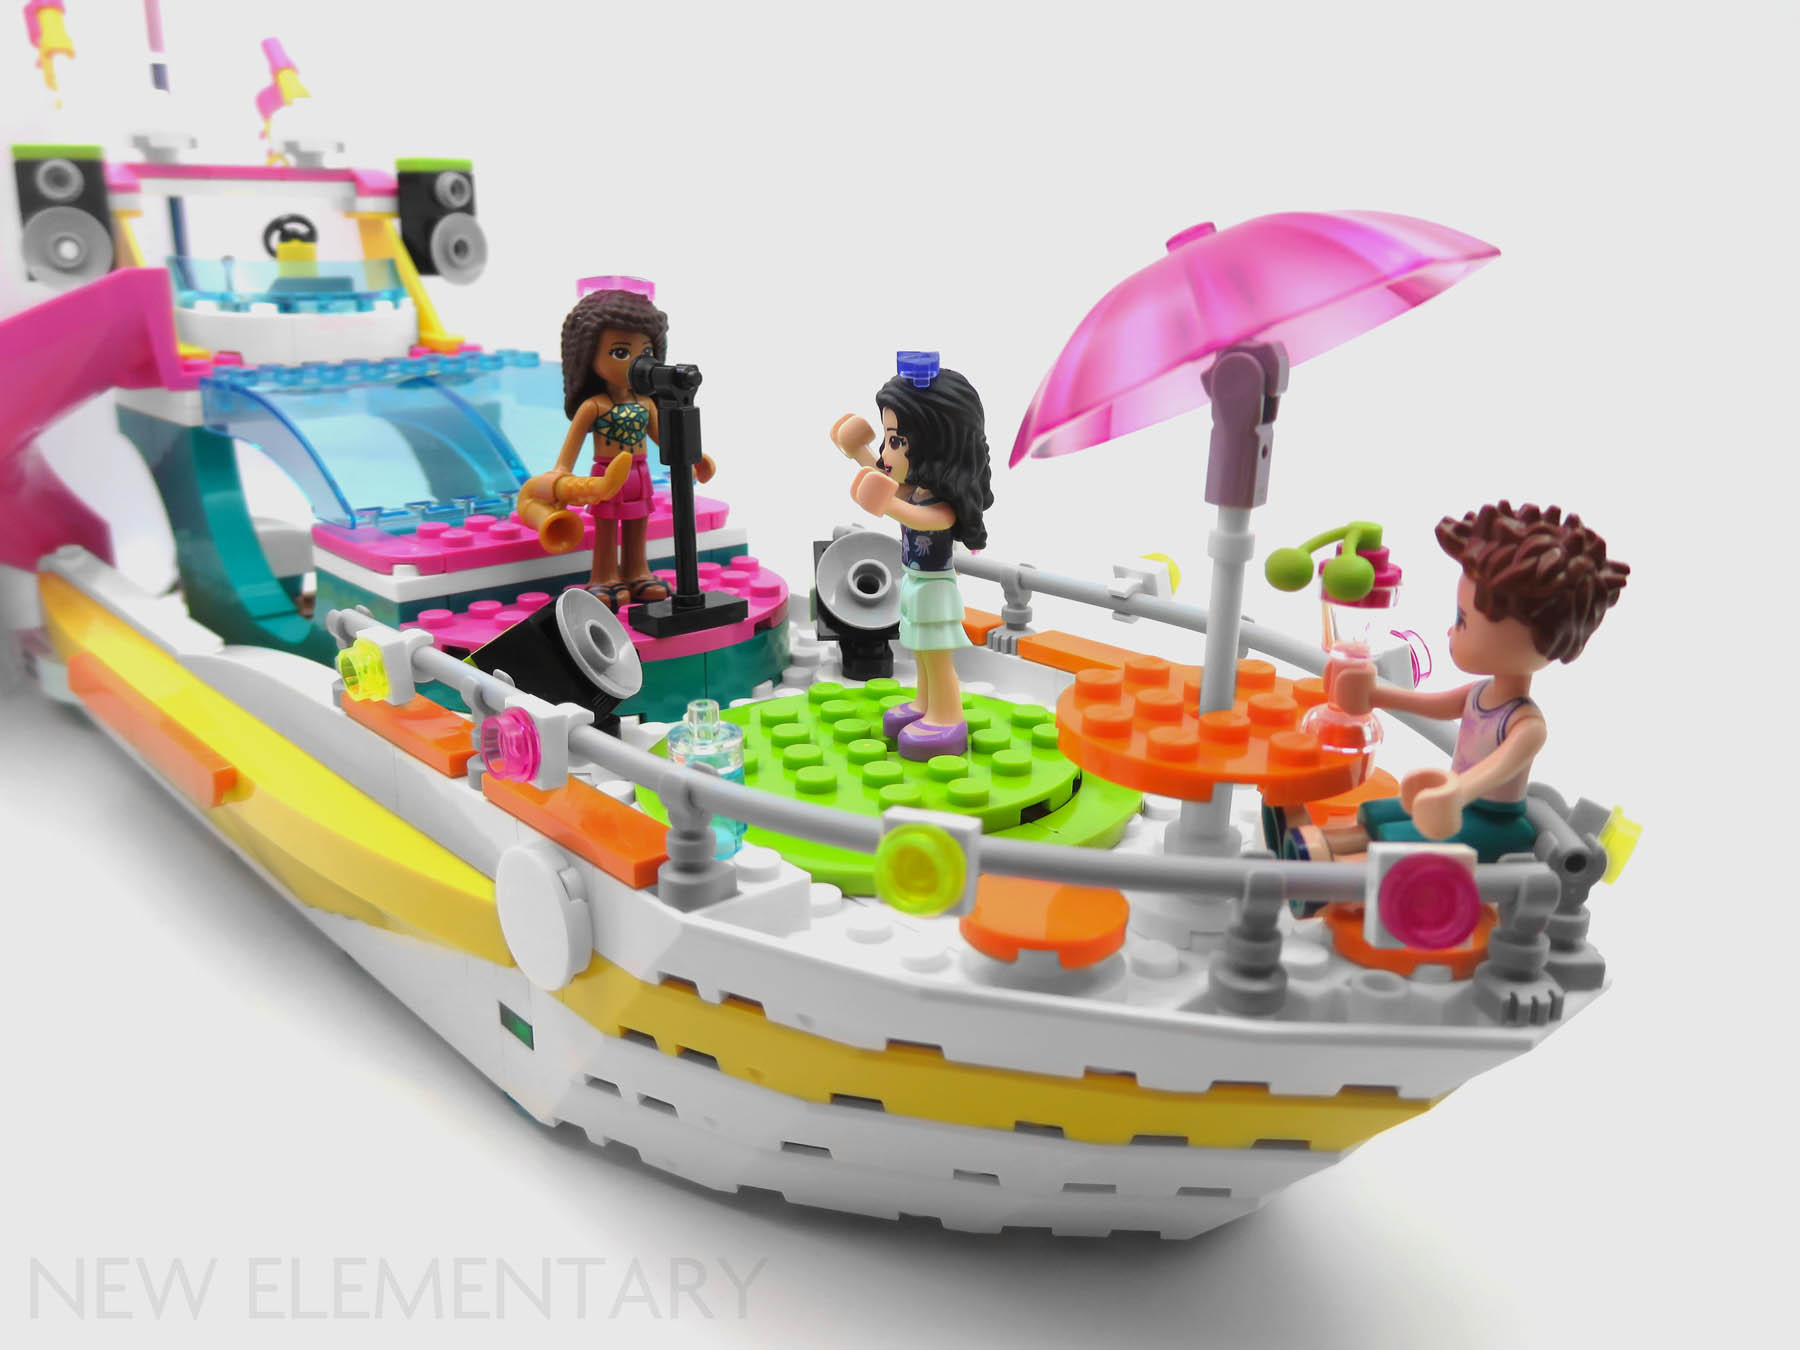 LEGO® Friends review | 41433 Elementary: sets New & techniques LEGO® build: alt Boat parts, Party and